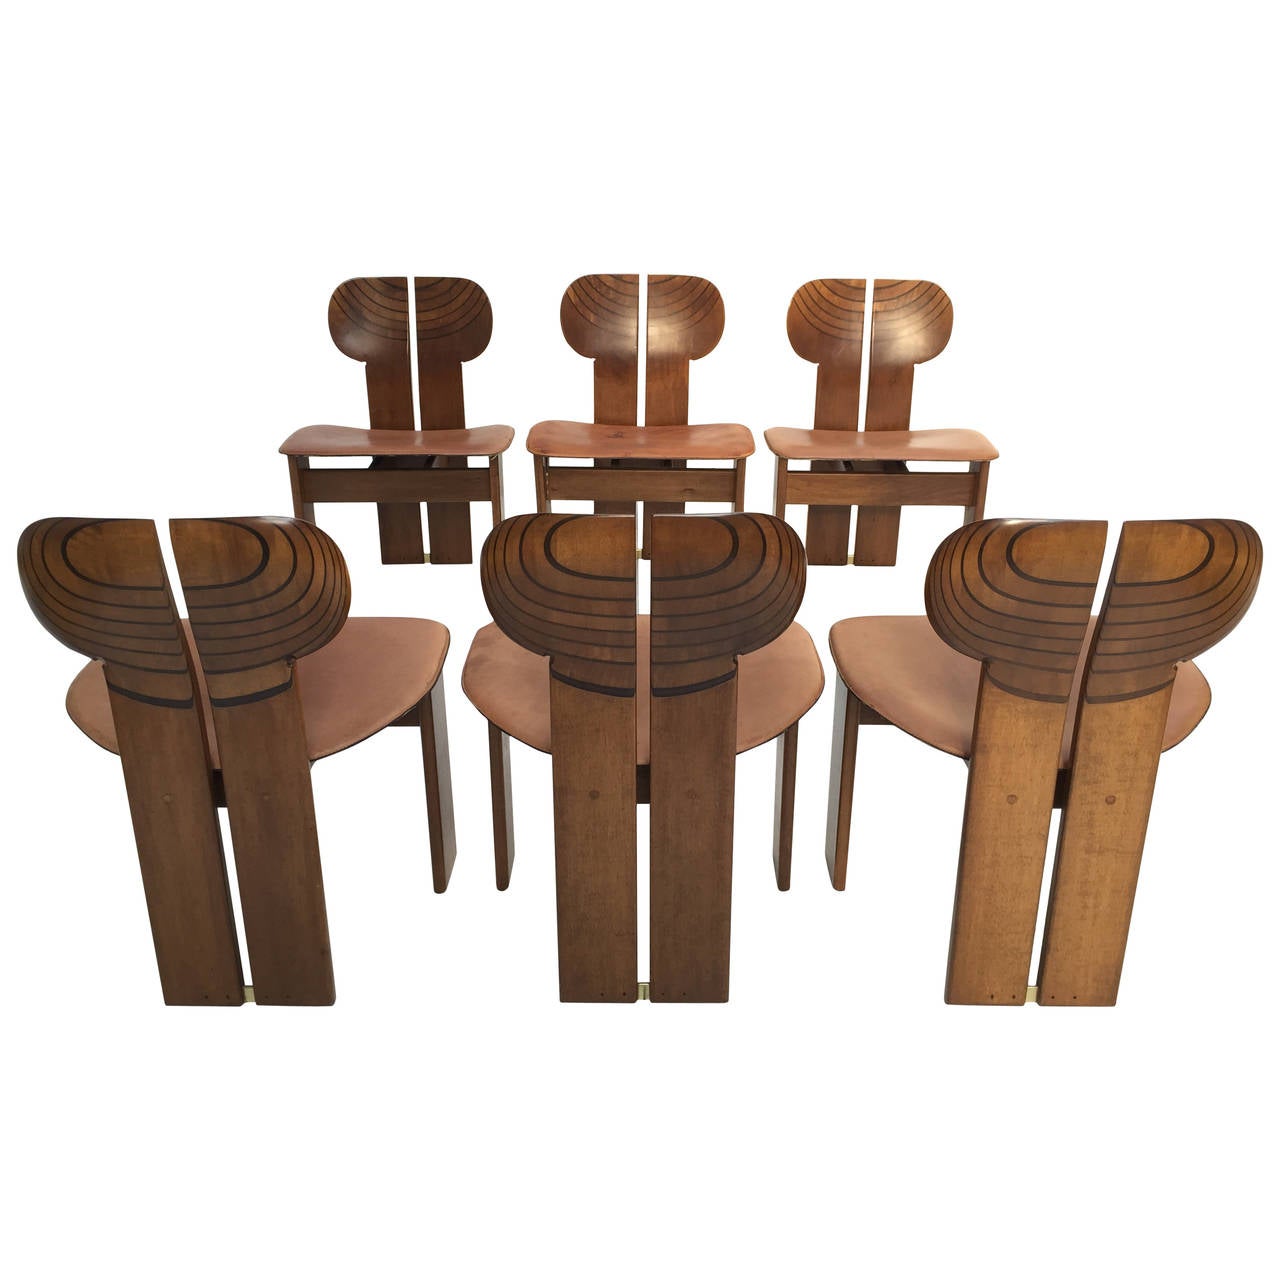 Mid-Century Modern 'Africa' Chairs by Scarpa, Finished in Walnut, Ebony and Leather, Signed